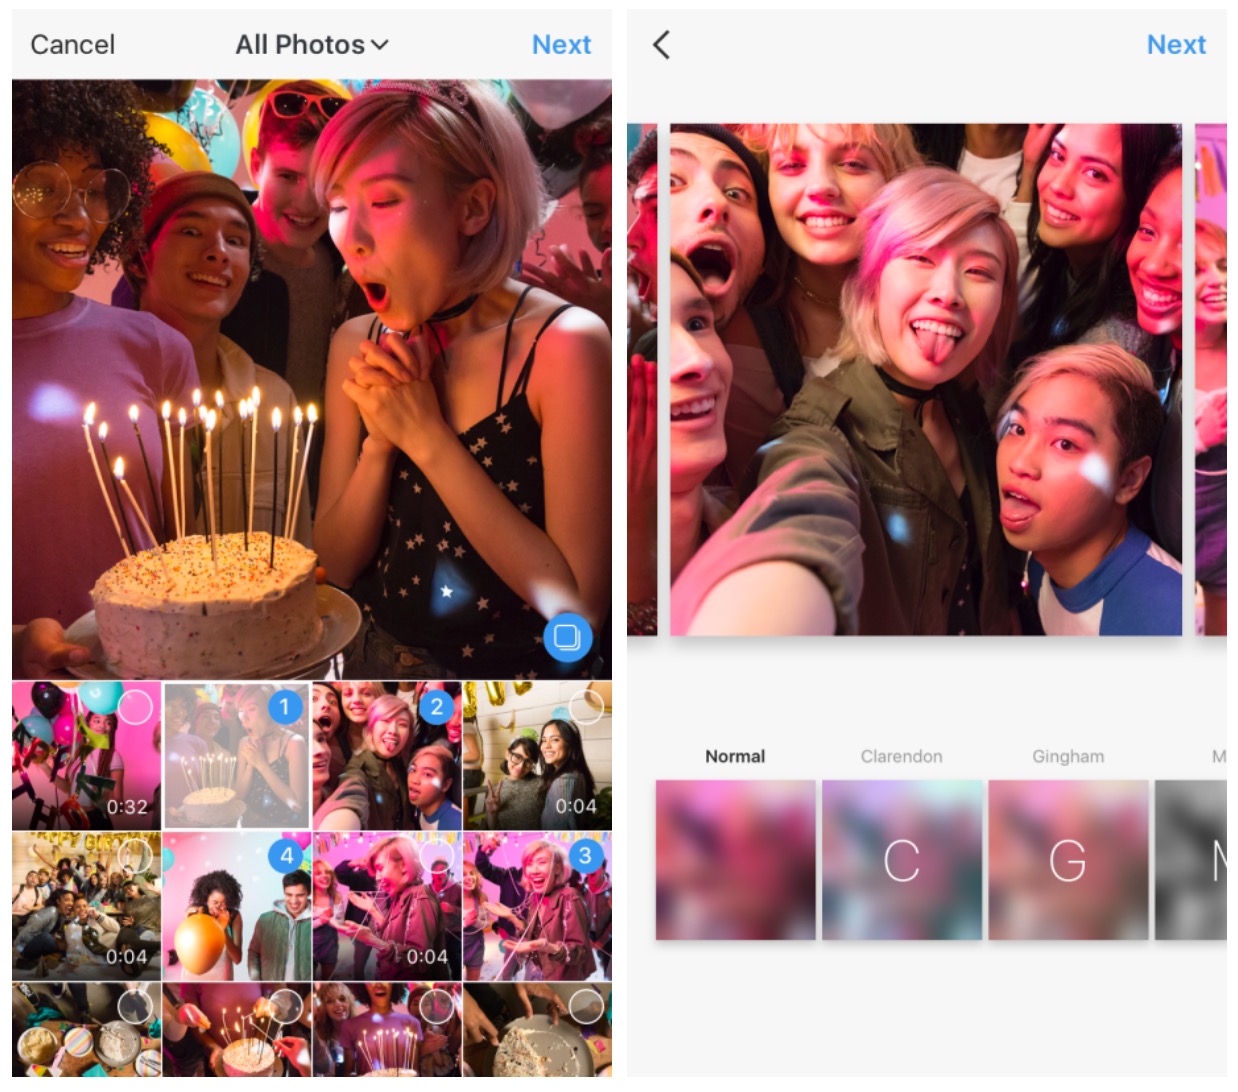 Instagram Now Lets You Share Multiple Photos and Videos in One Post